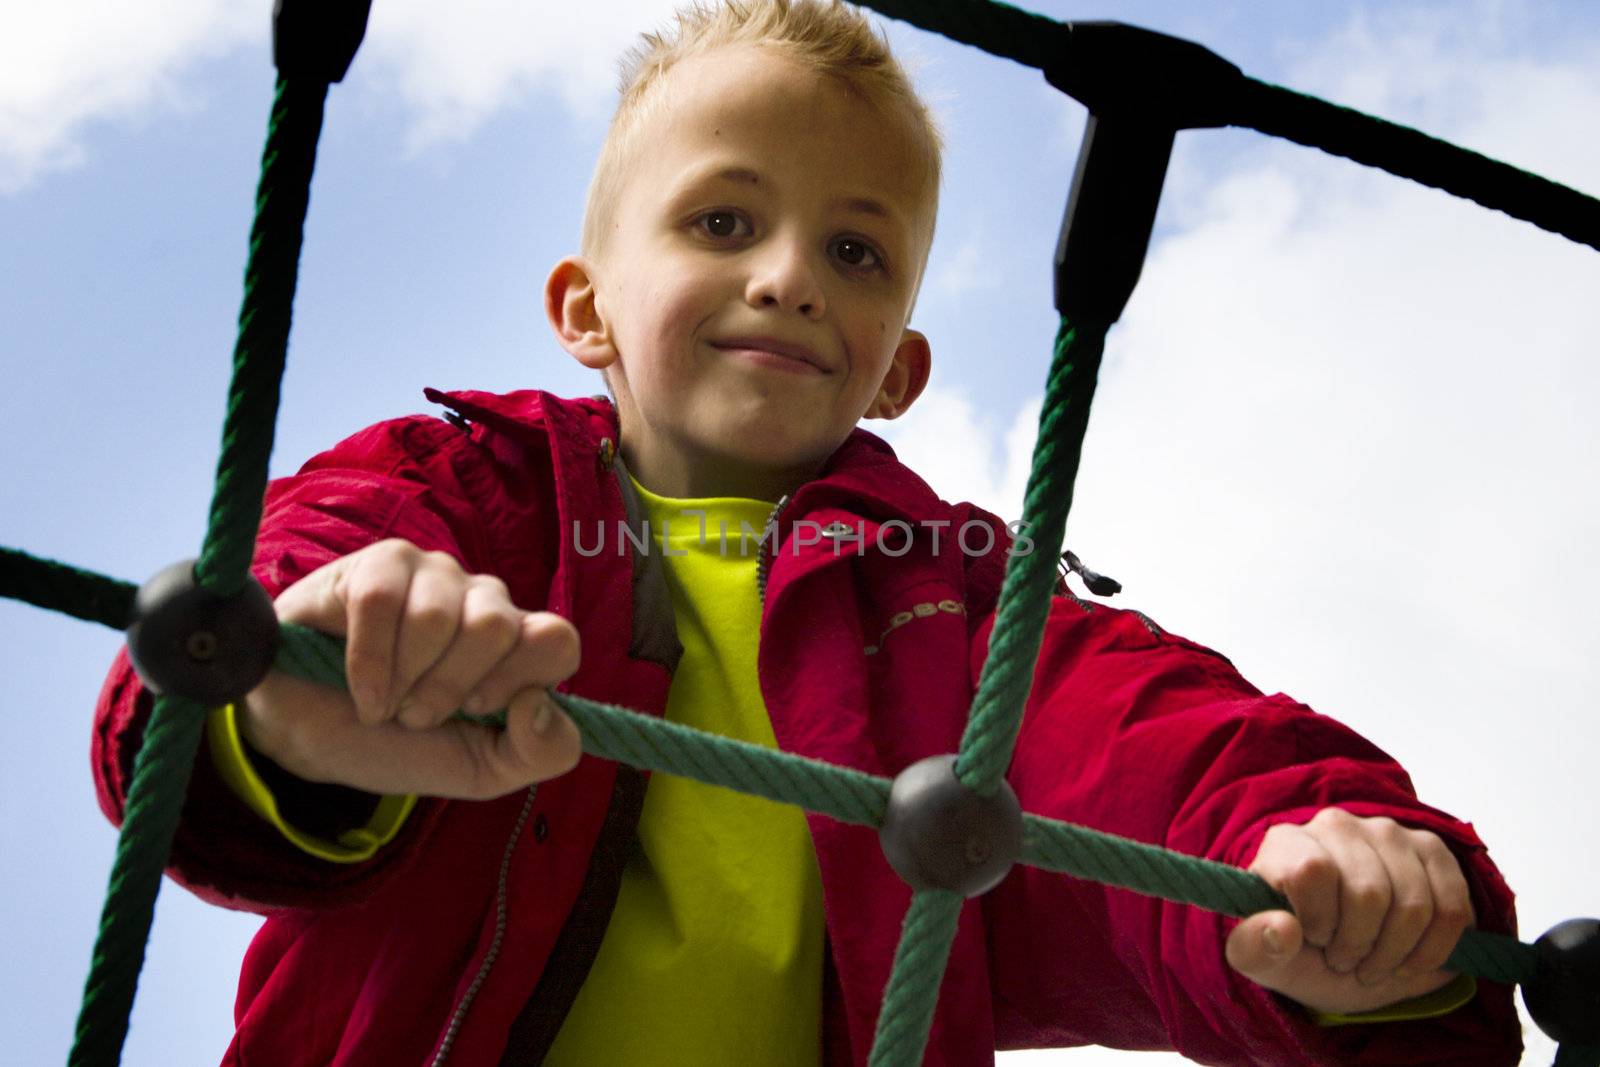 Child playing at the playground by DNFStyle